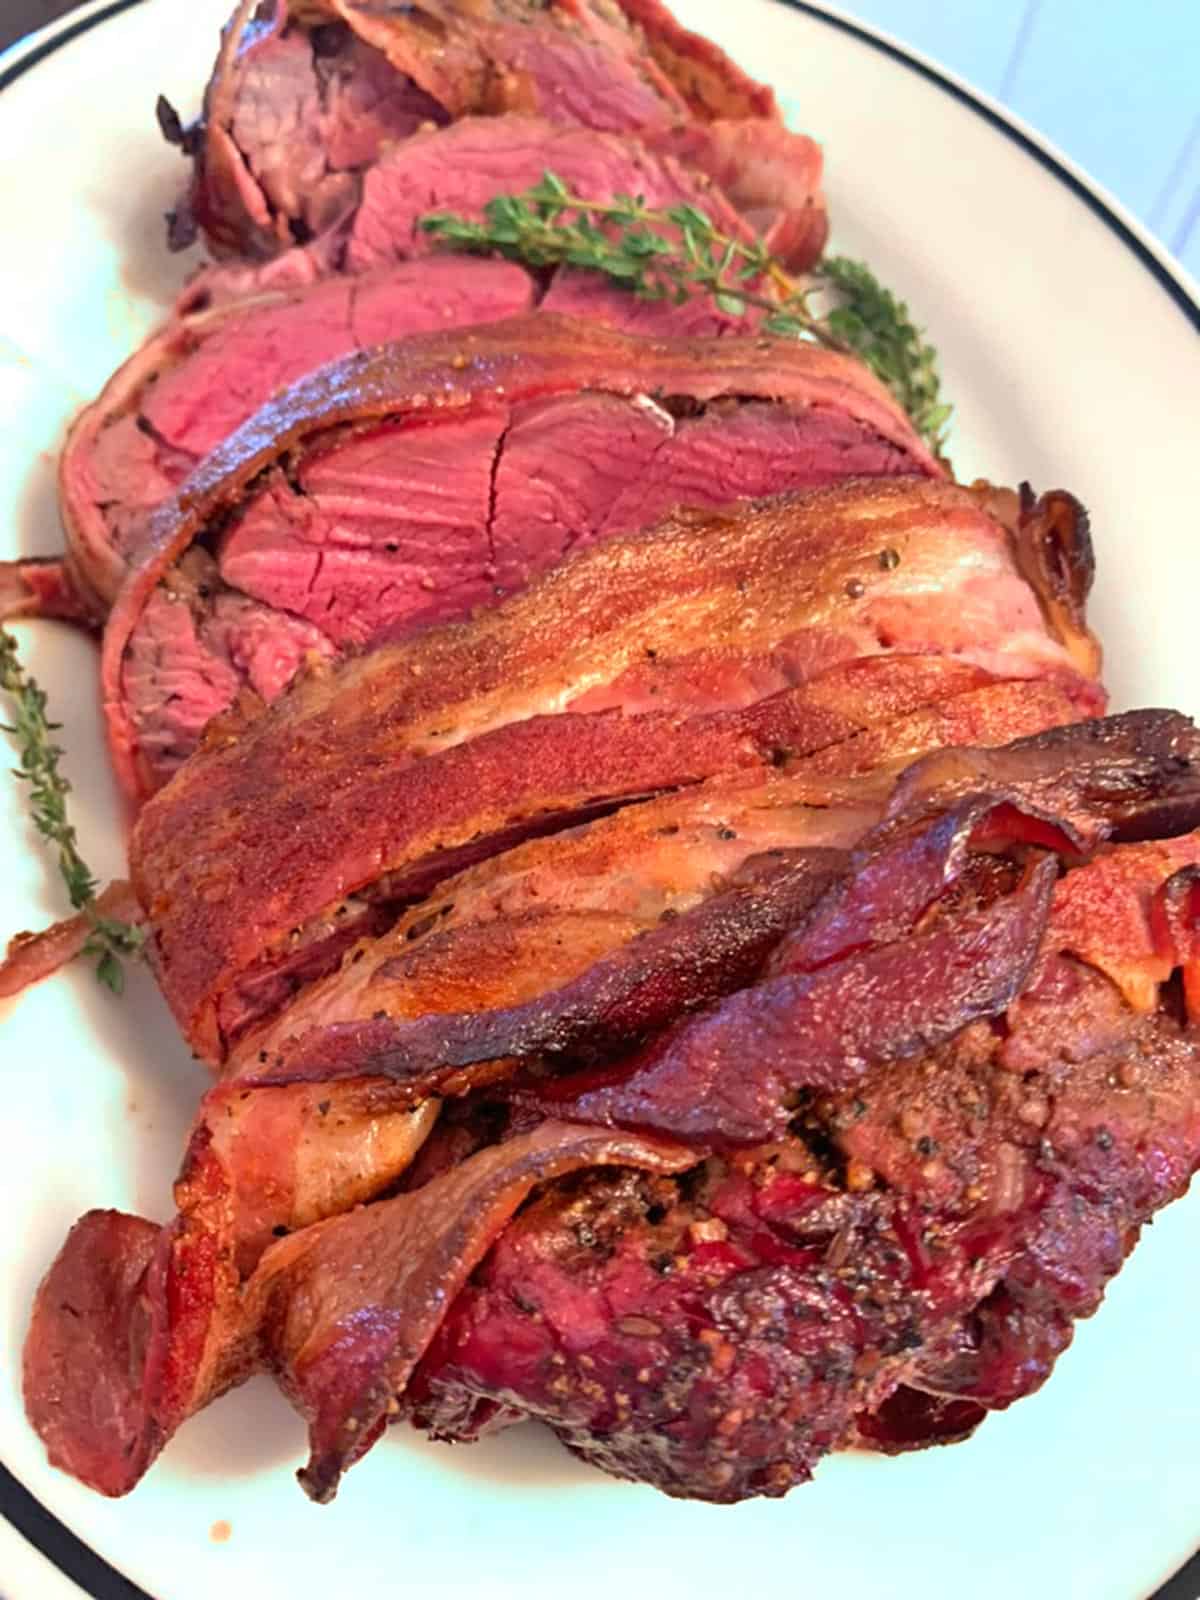 A plate of beef tenderloin wrapped in bacon, sliced and done medium-rare.